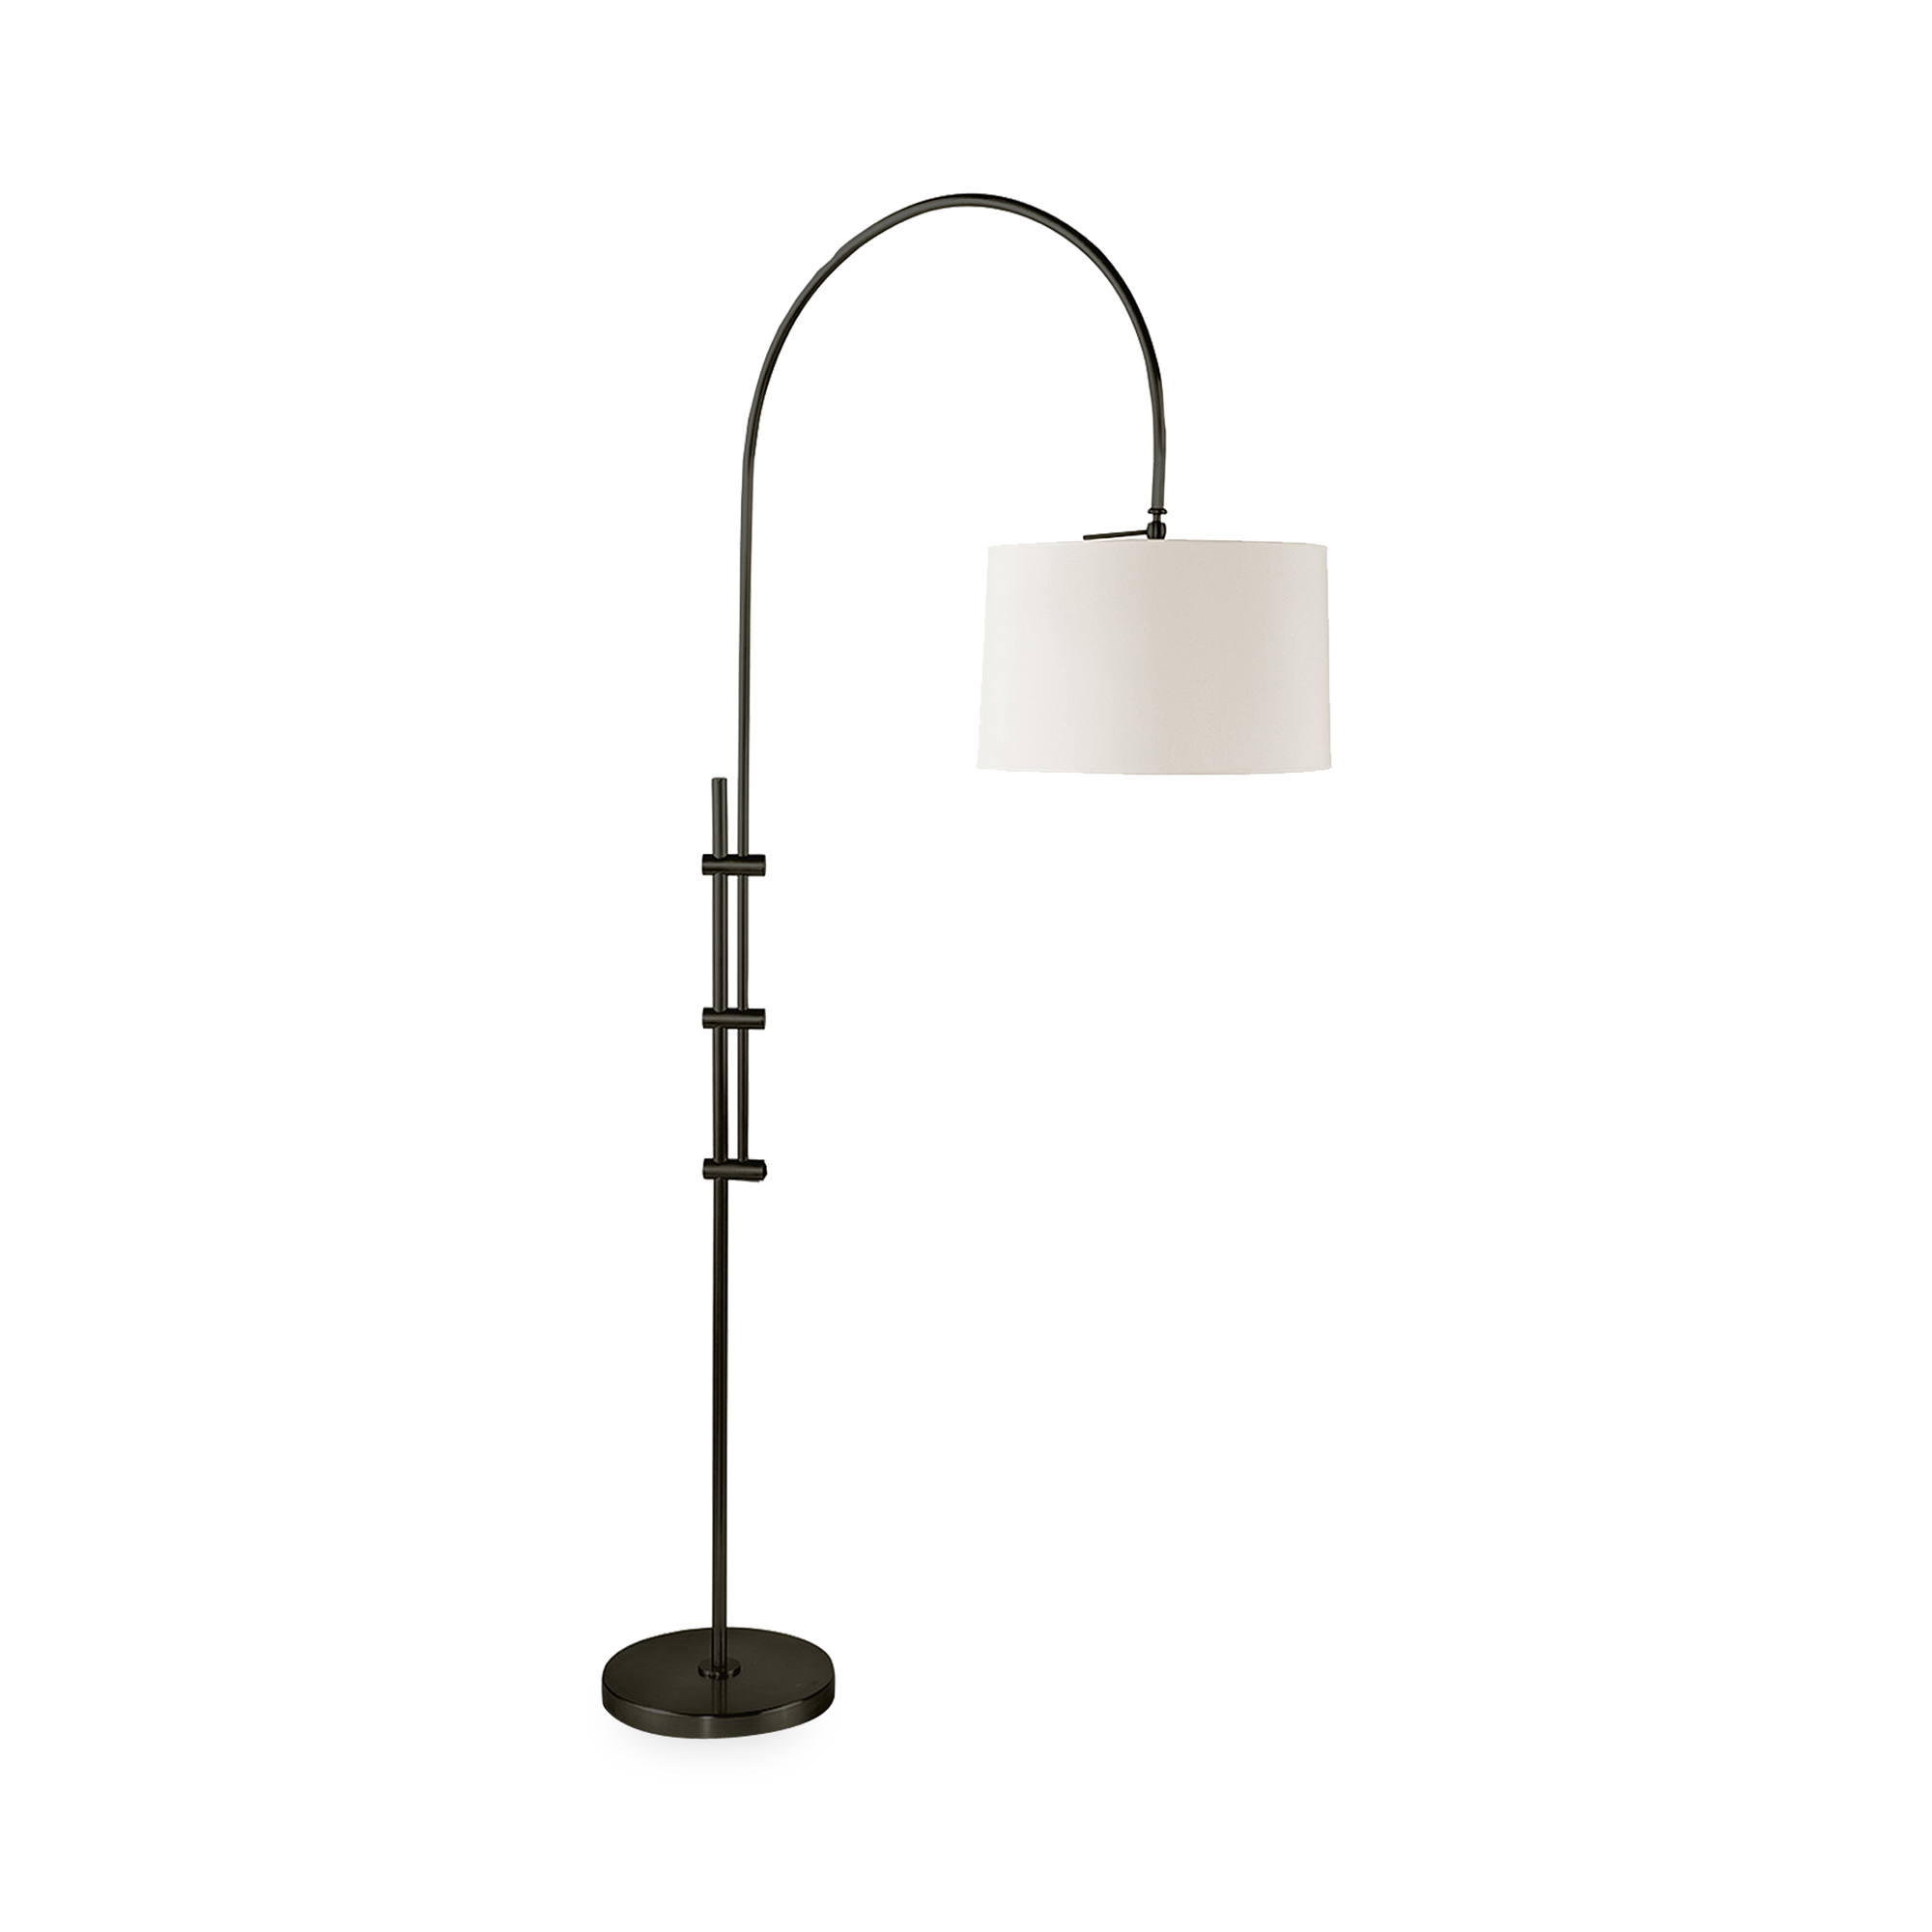 The juxtaposition of a metallic, adjustable base with a fabric shade gives this floor lamp a modern aesthetic—seamlessly fusing fashion and function.